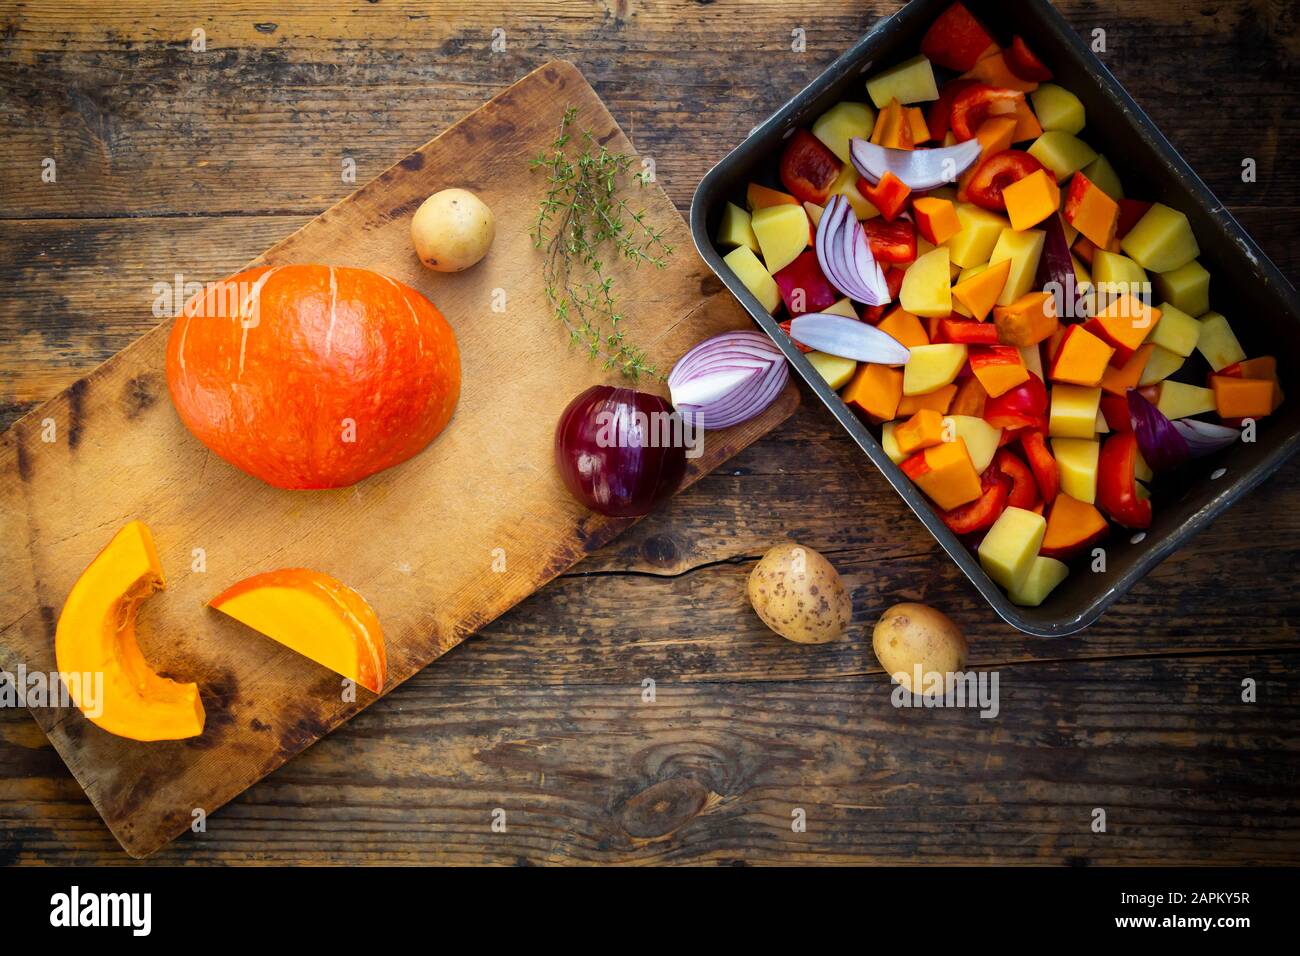 Chopped vegetables: hokkaido pumpkin, potatoes, bell pepper and red onions Stock Photo